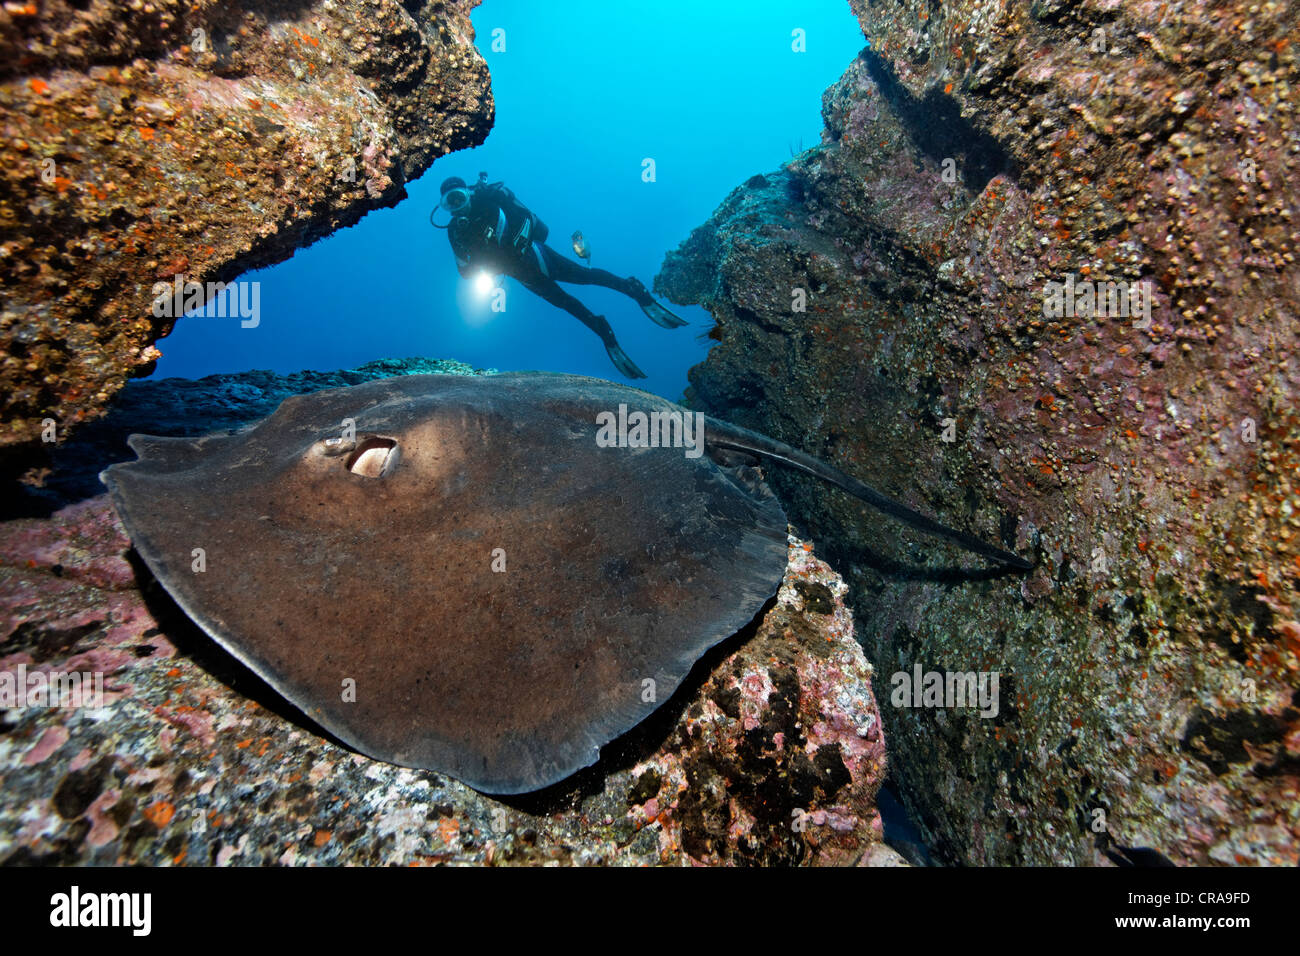 Diver with torch watching a Common Stingray (Dasyatis pastinaca), in rocky reef, Madeira, Portugal, Europe, Atlantic Ocean Stock Photo